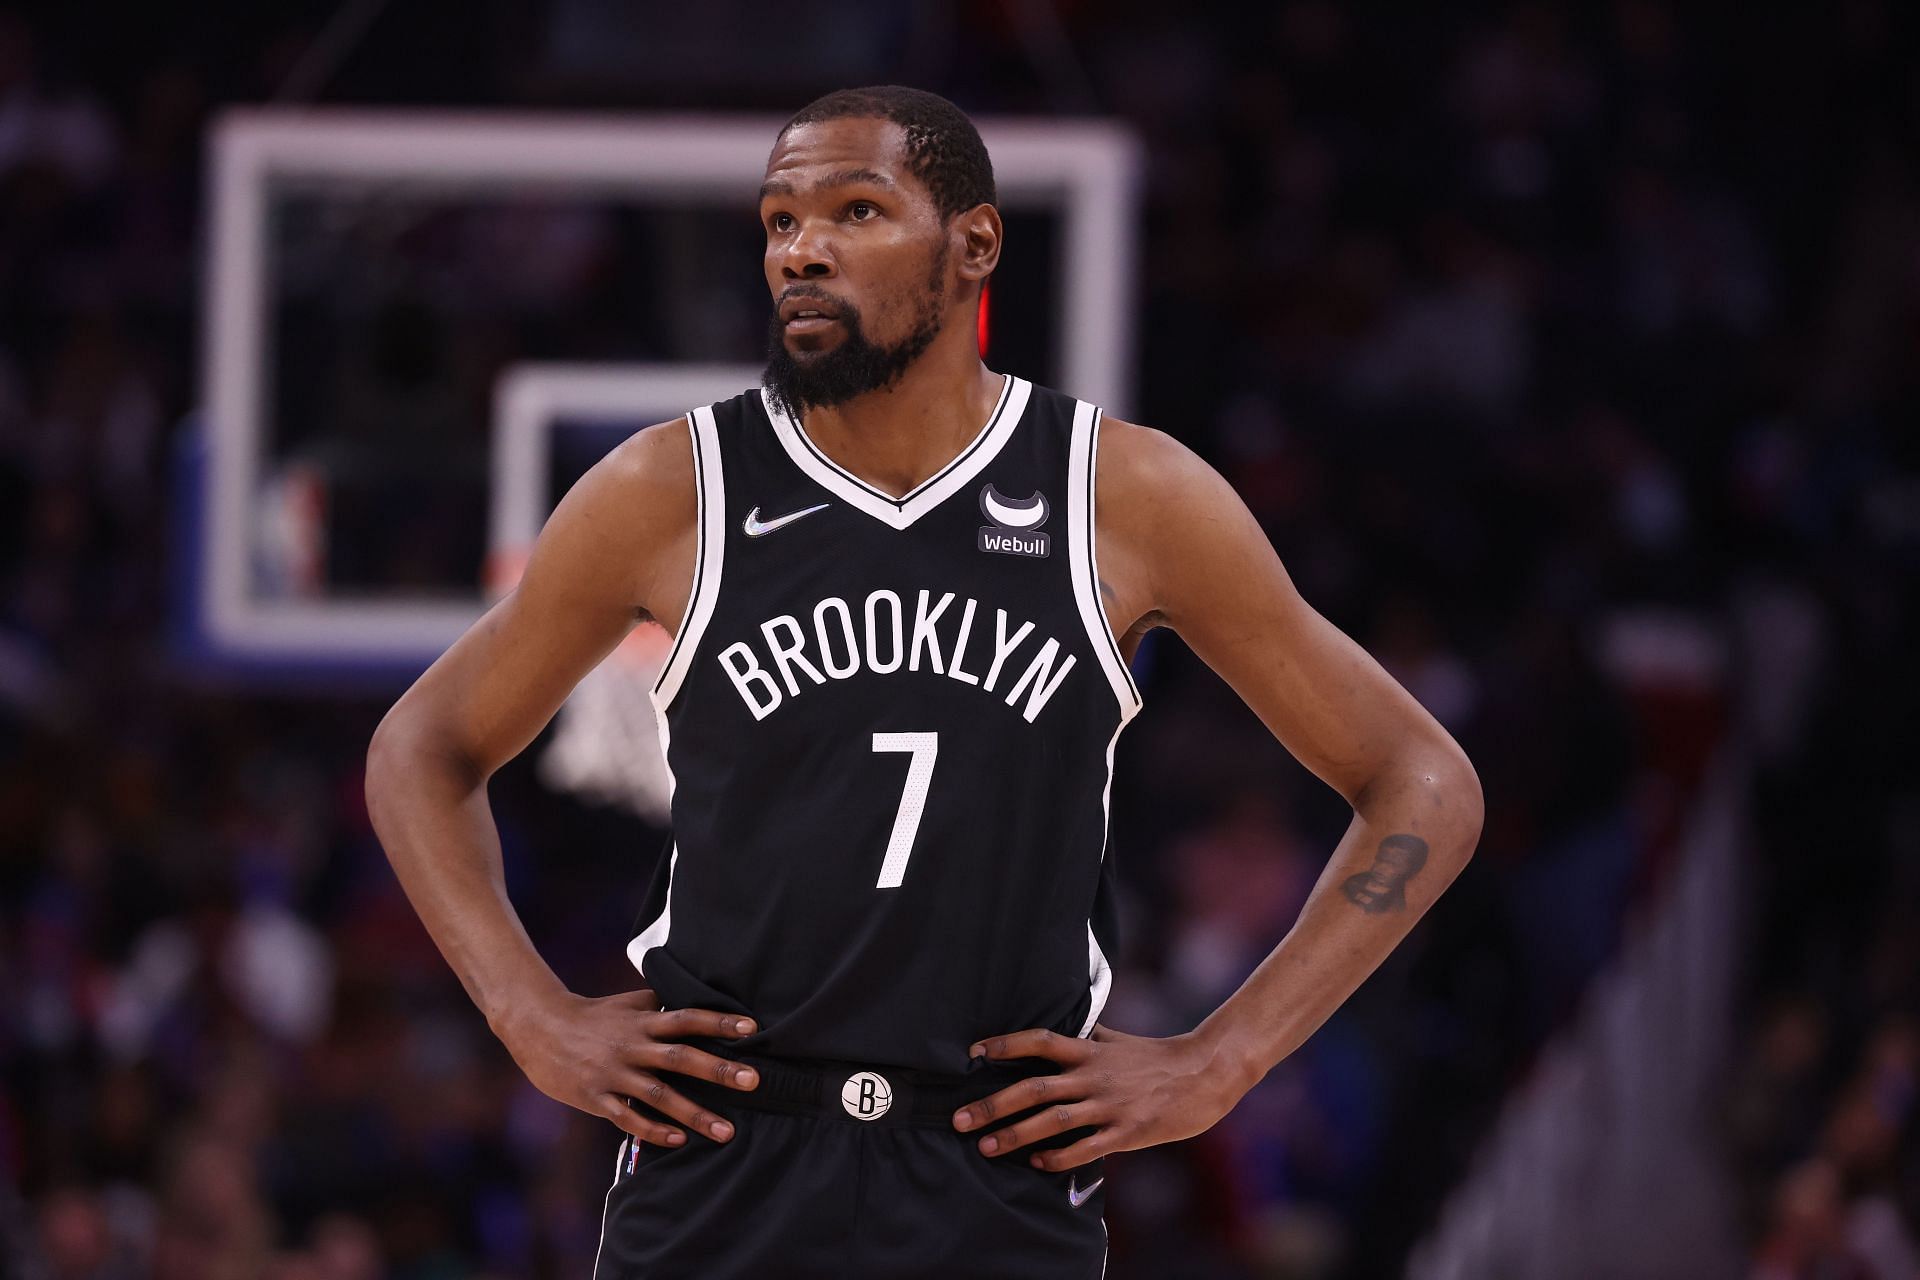 Kevin Durant and his Brooklyn Nets square off against the Golden State Warriors on Tuesday